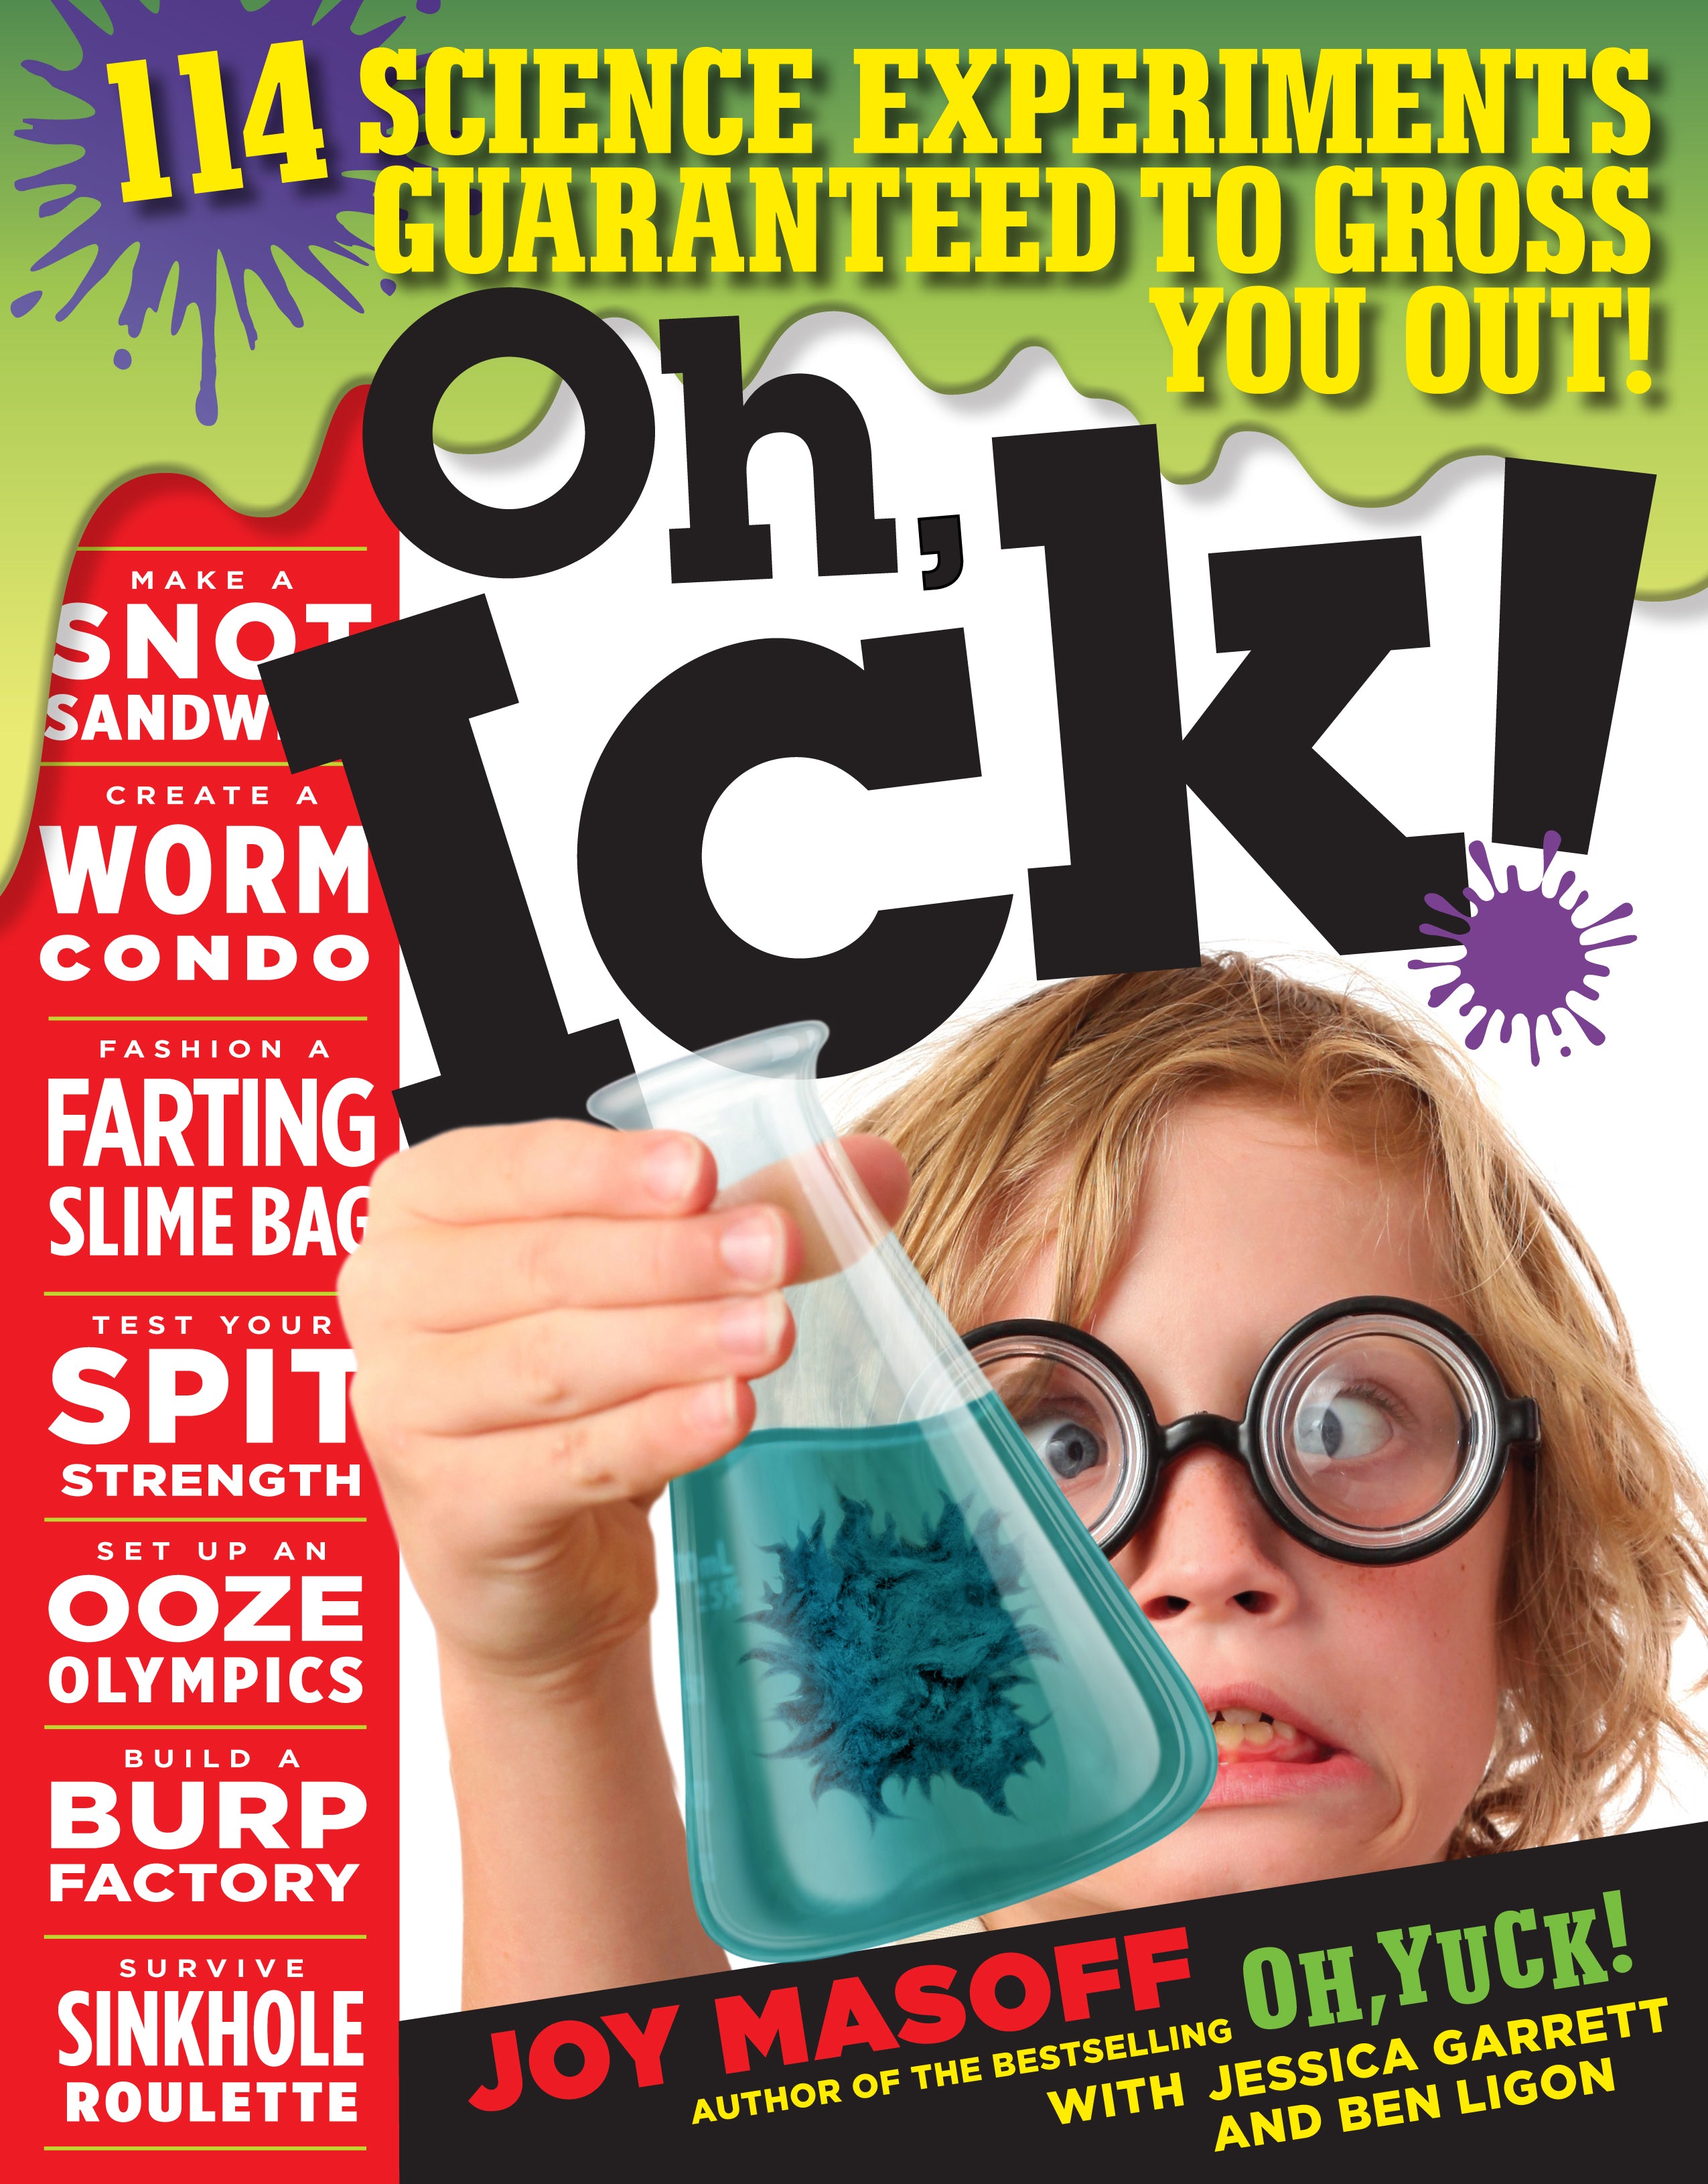 Oh, Ick! - 114 Science Experiments Guaranteed To Gross You Out    